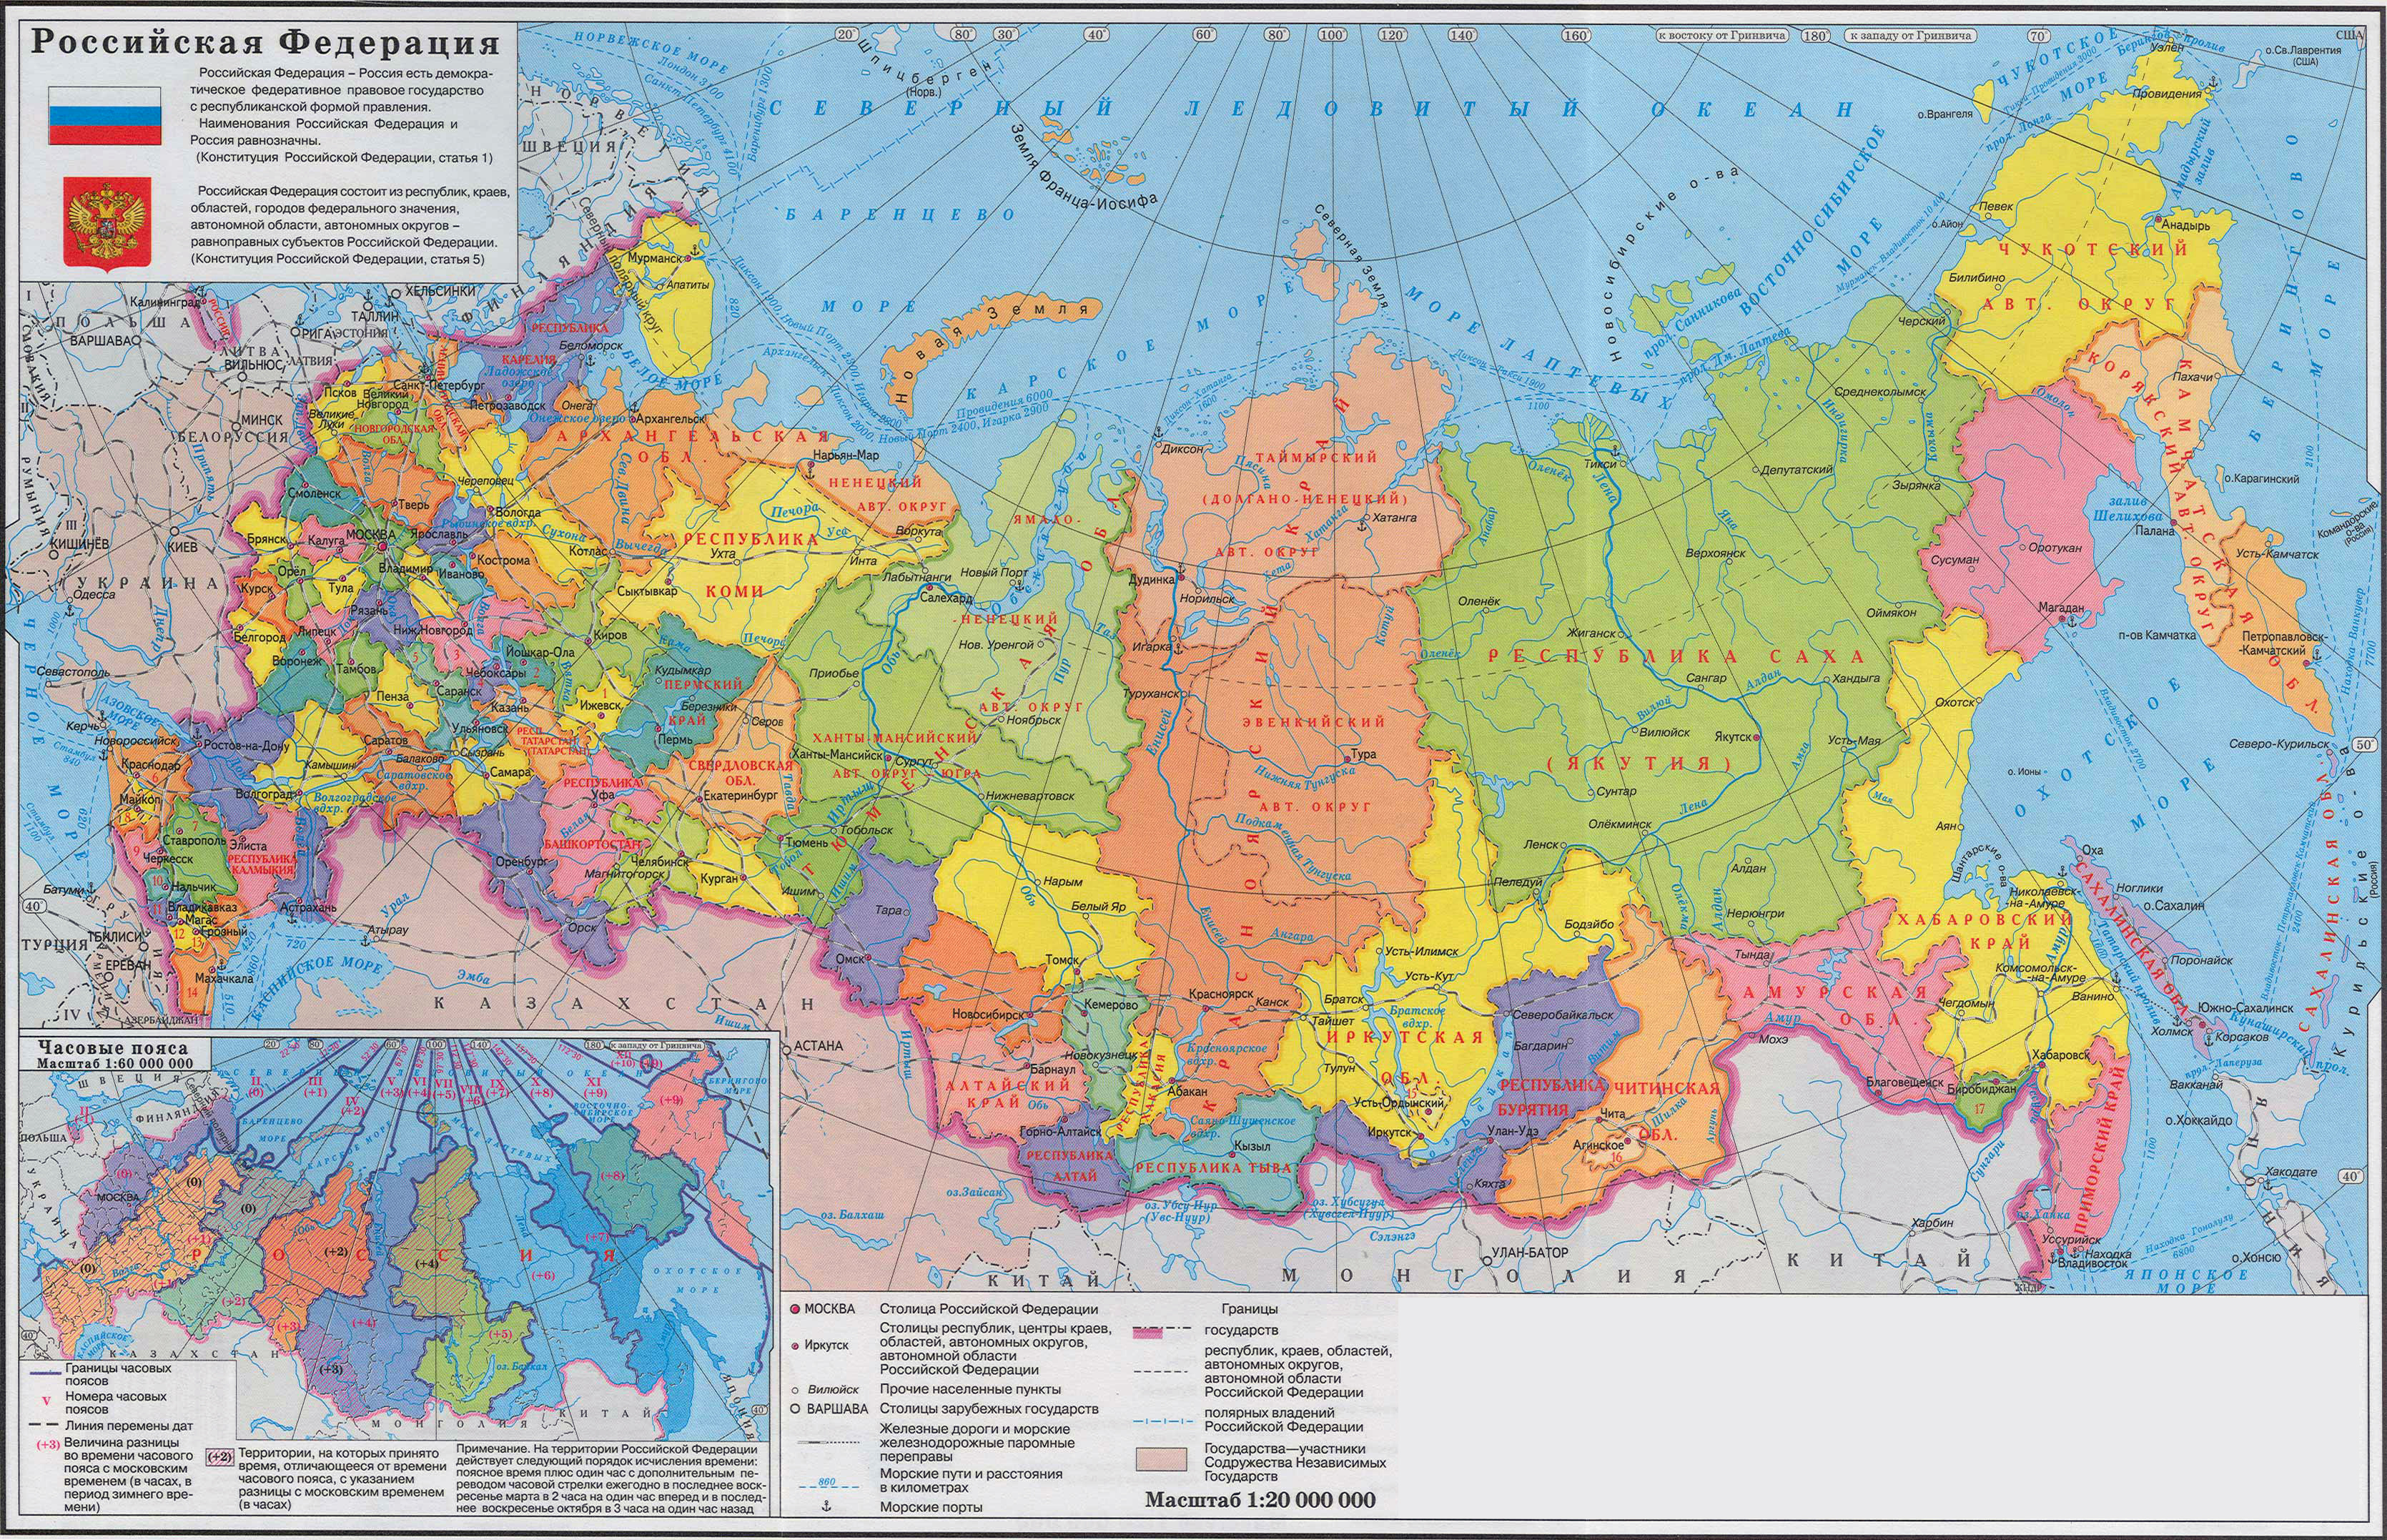 Map of the Russian Federation